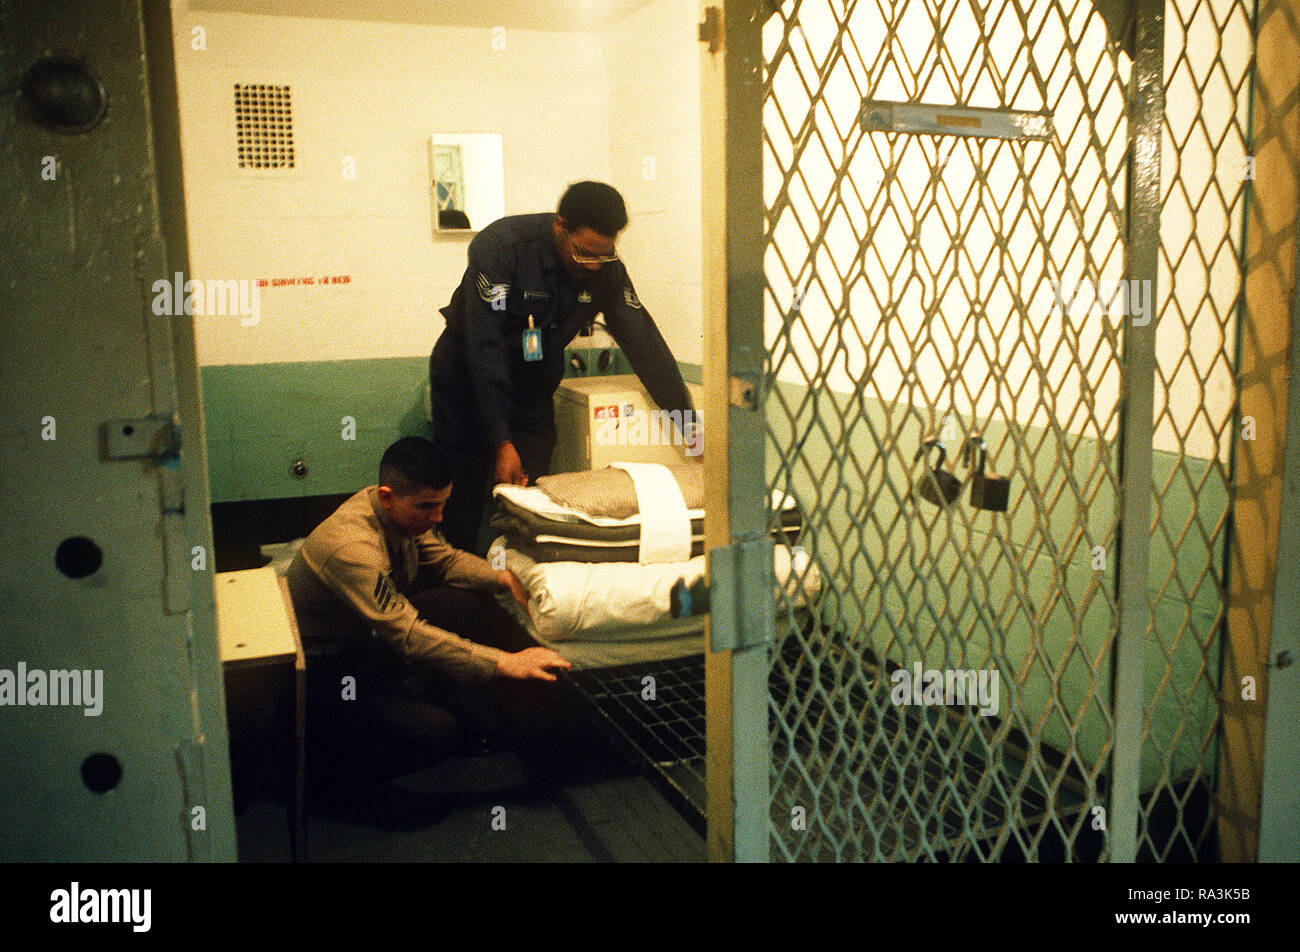 1977 - A soldier and Marine inspect a 6-foot cell at the U.S. Disciplinary Barracks at Fort Leavenworth Stock Photo